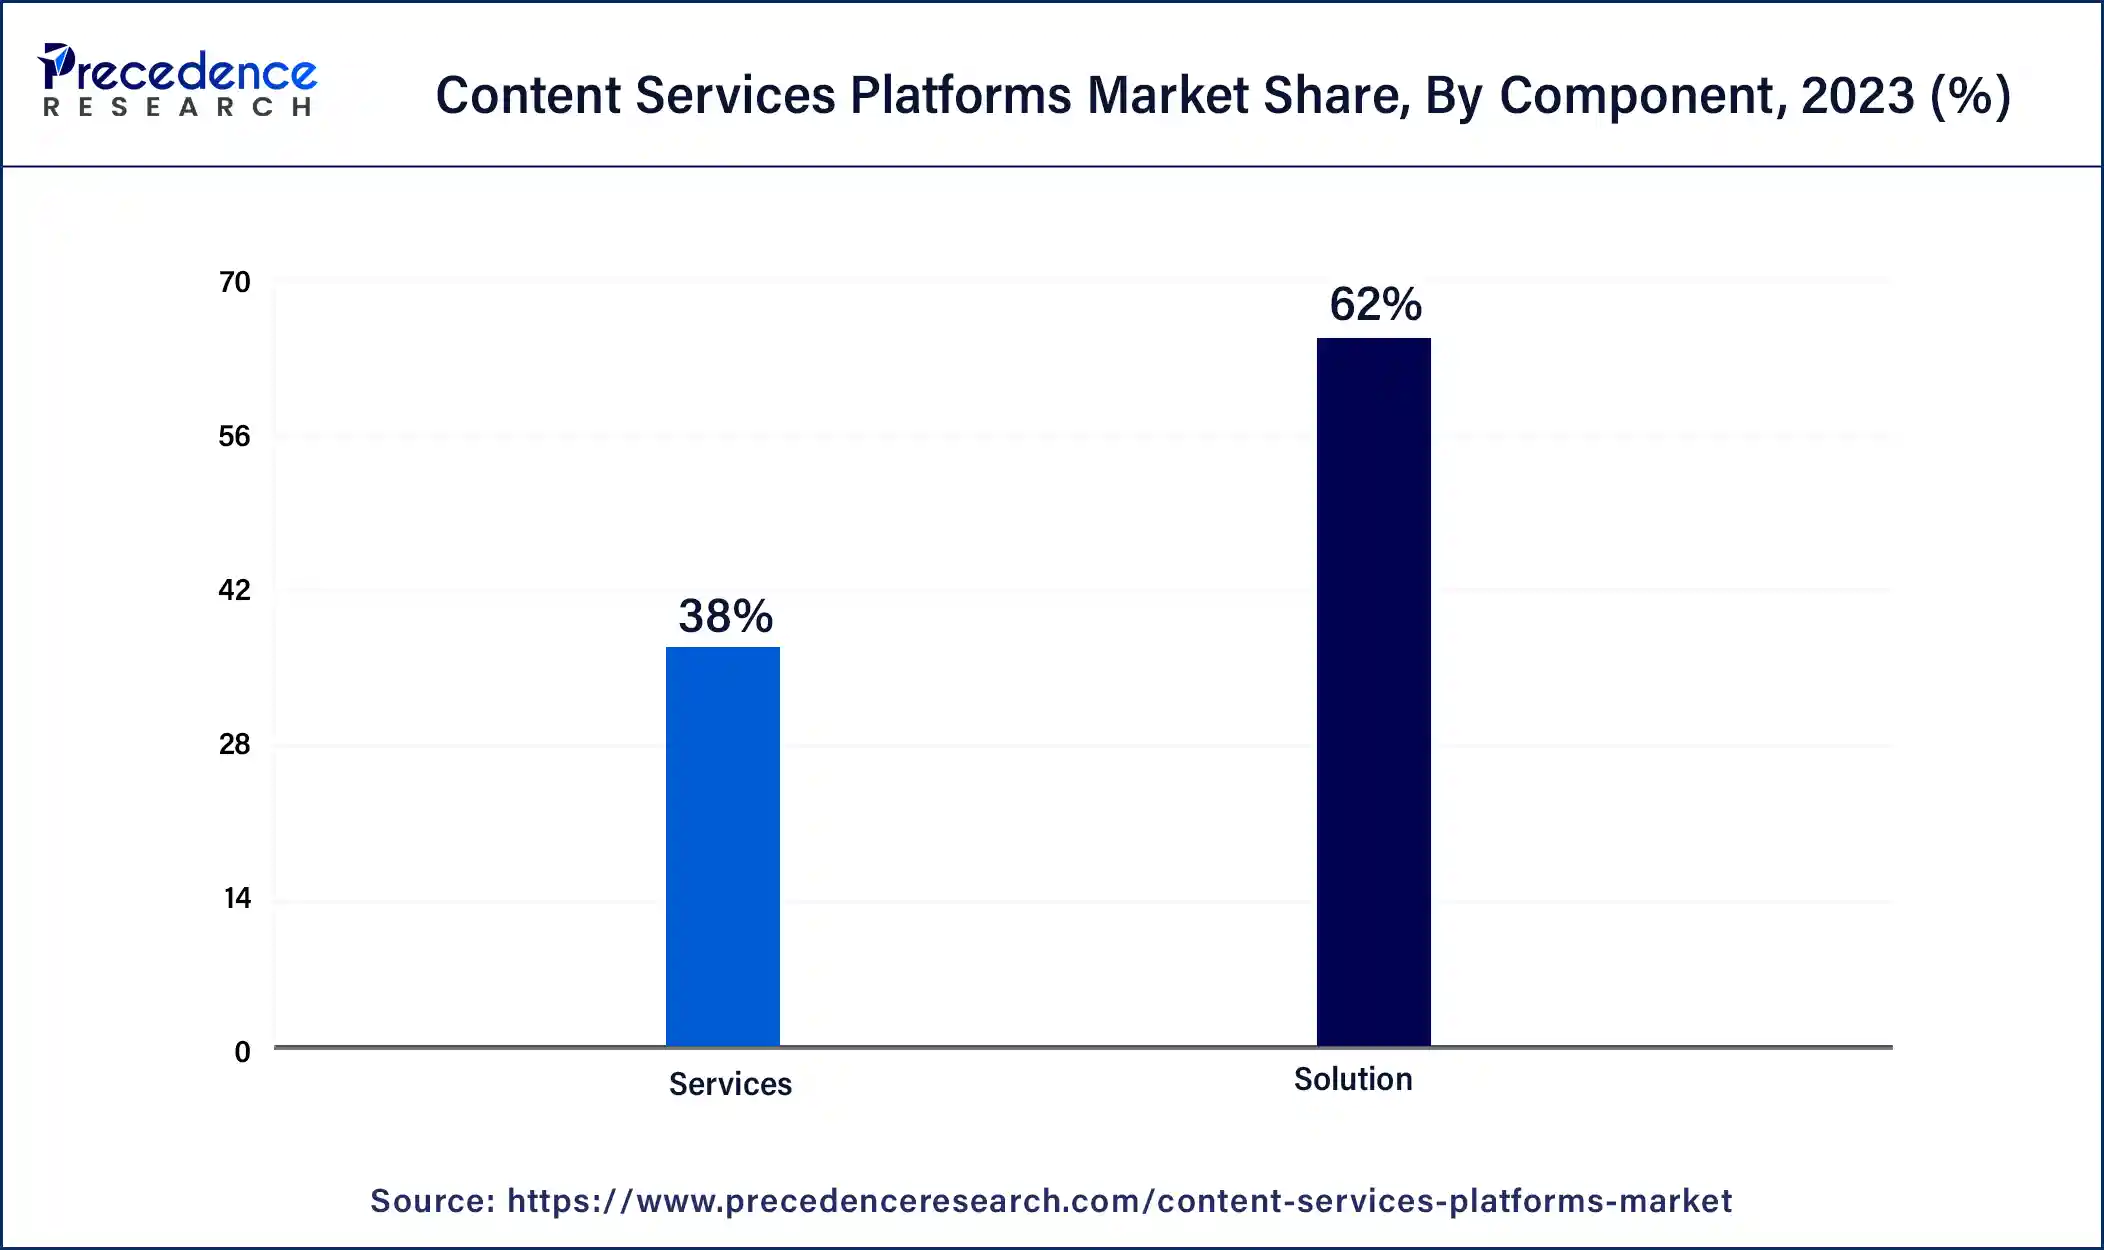 Content Services Platforms Market Share, By Component, 2023 (%)